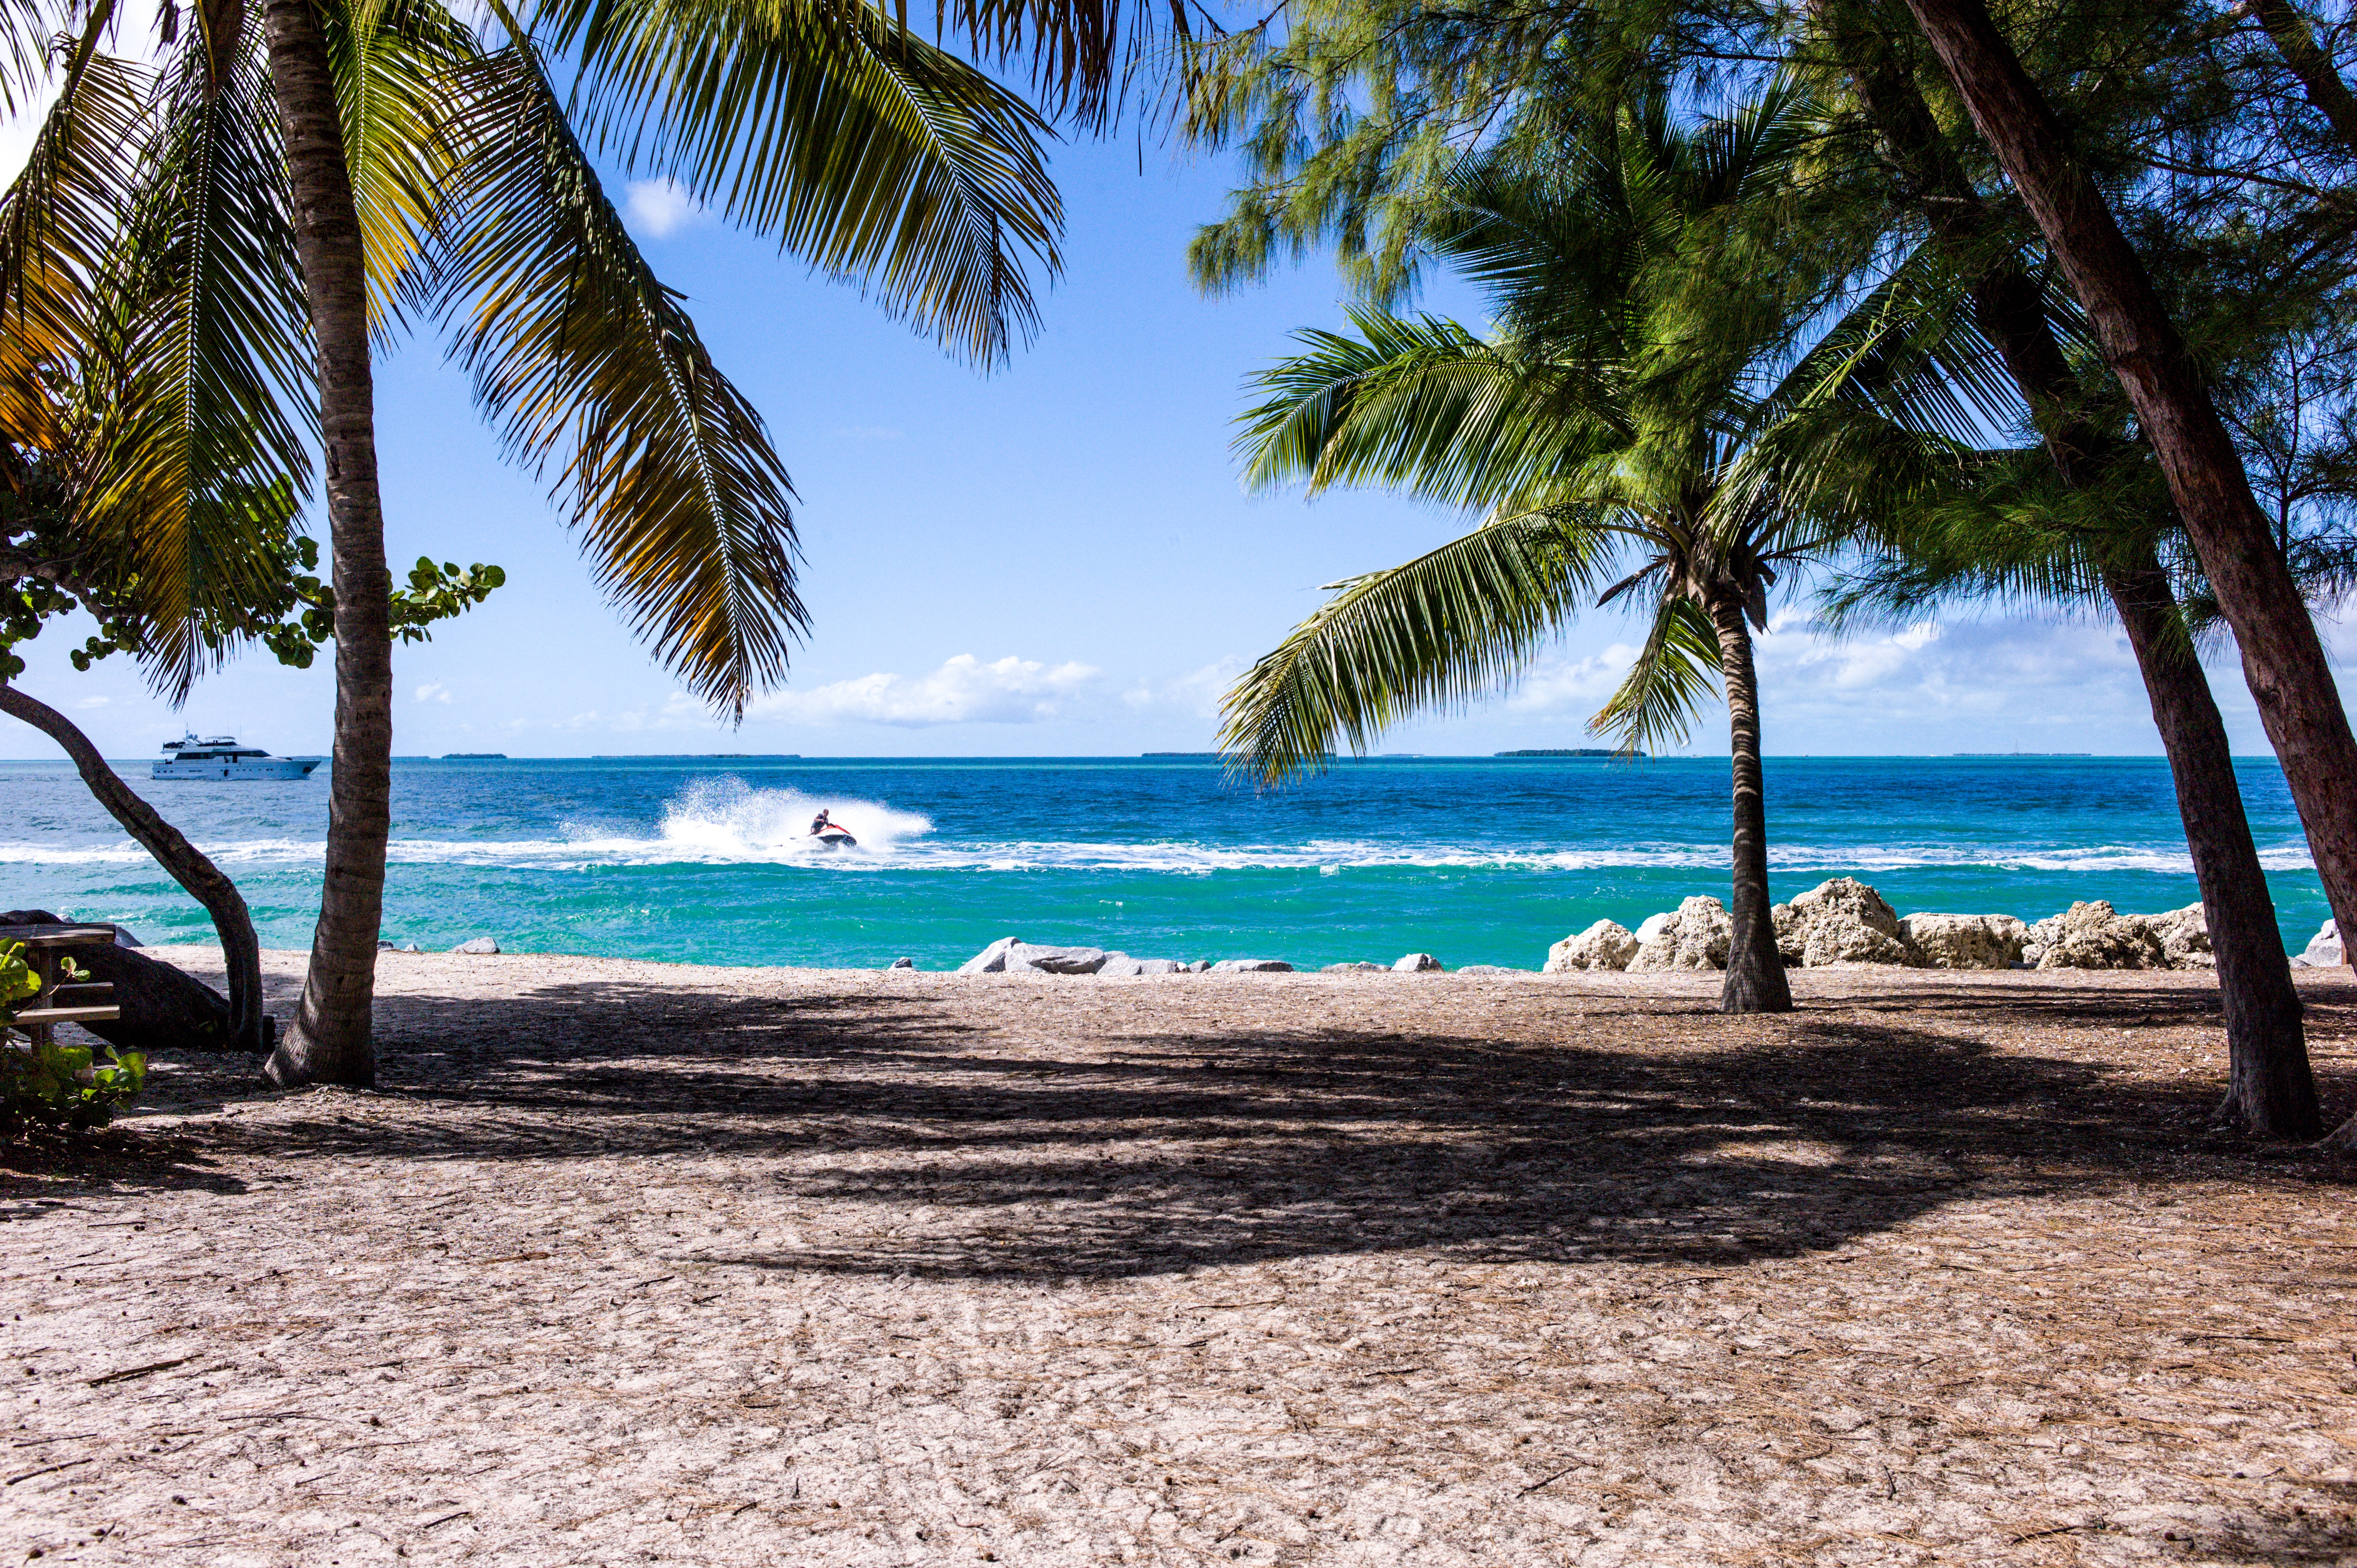 Flight Deal: Trinidad And Tobago For As Low As $220